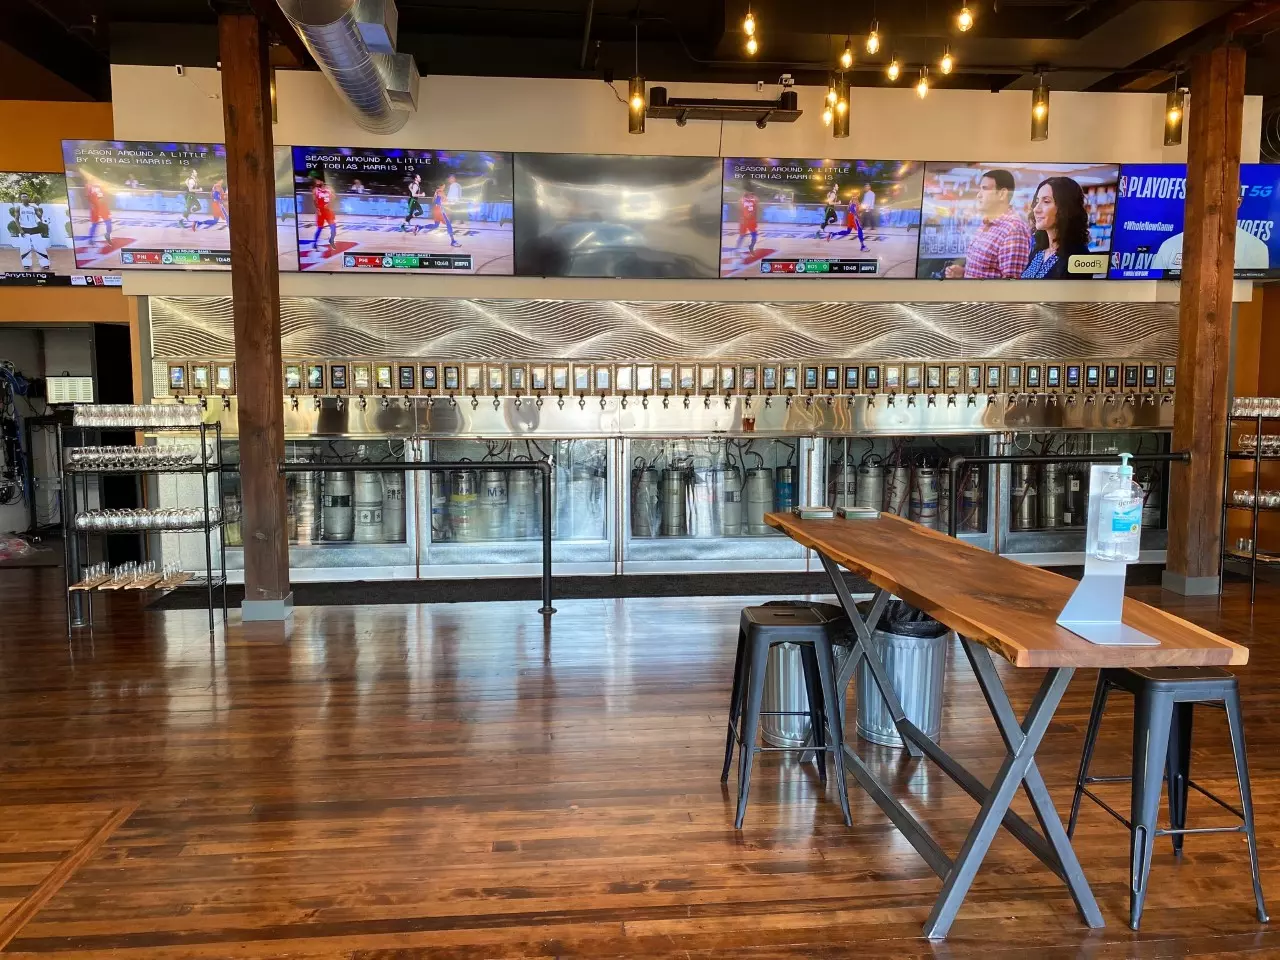 The Biggest Techy Self-Tap Room In Washington Is Now In Yakima!